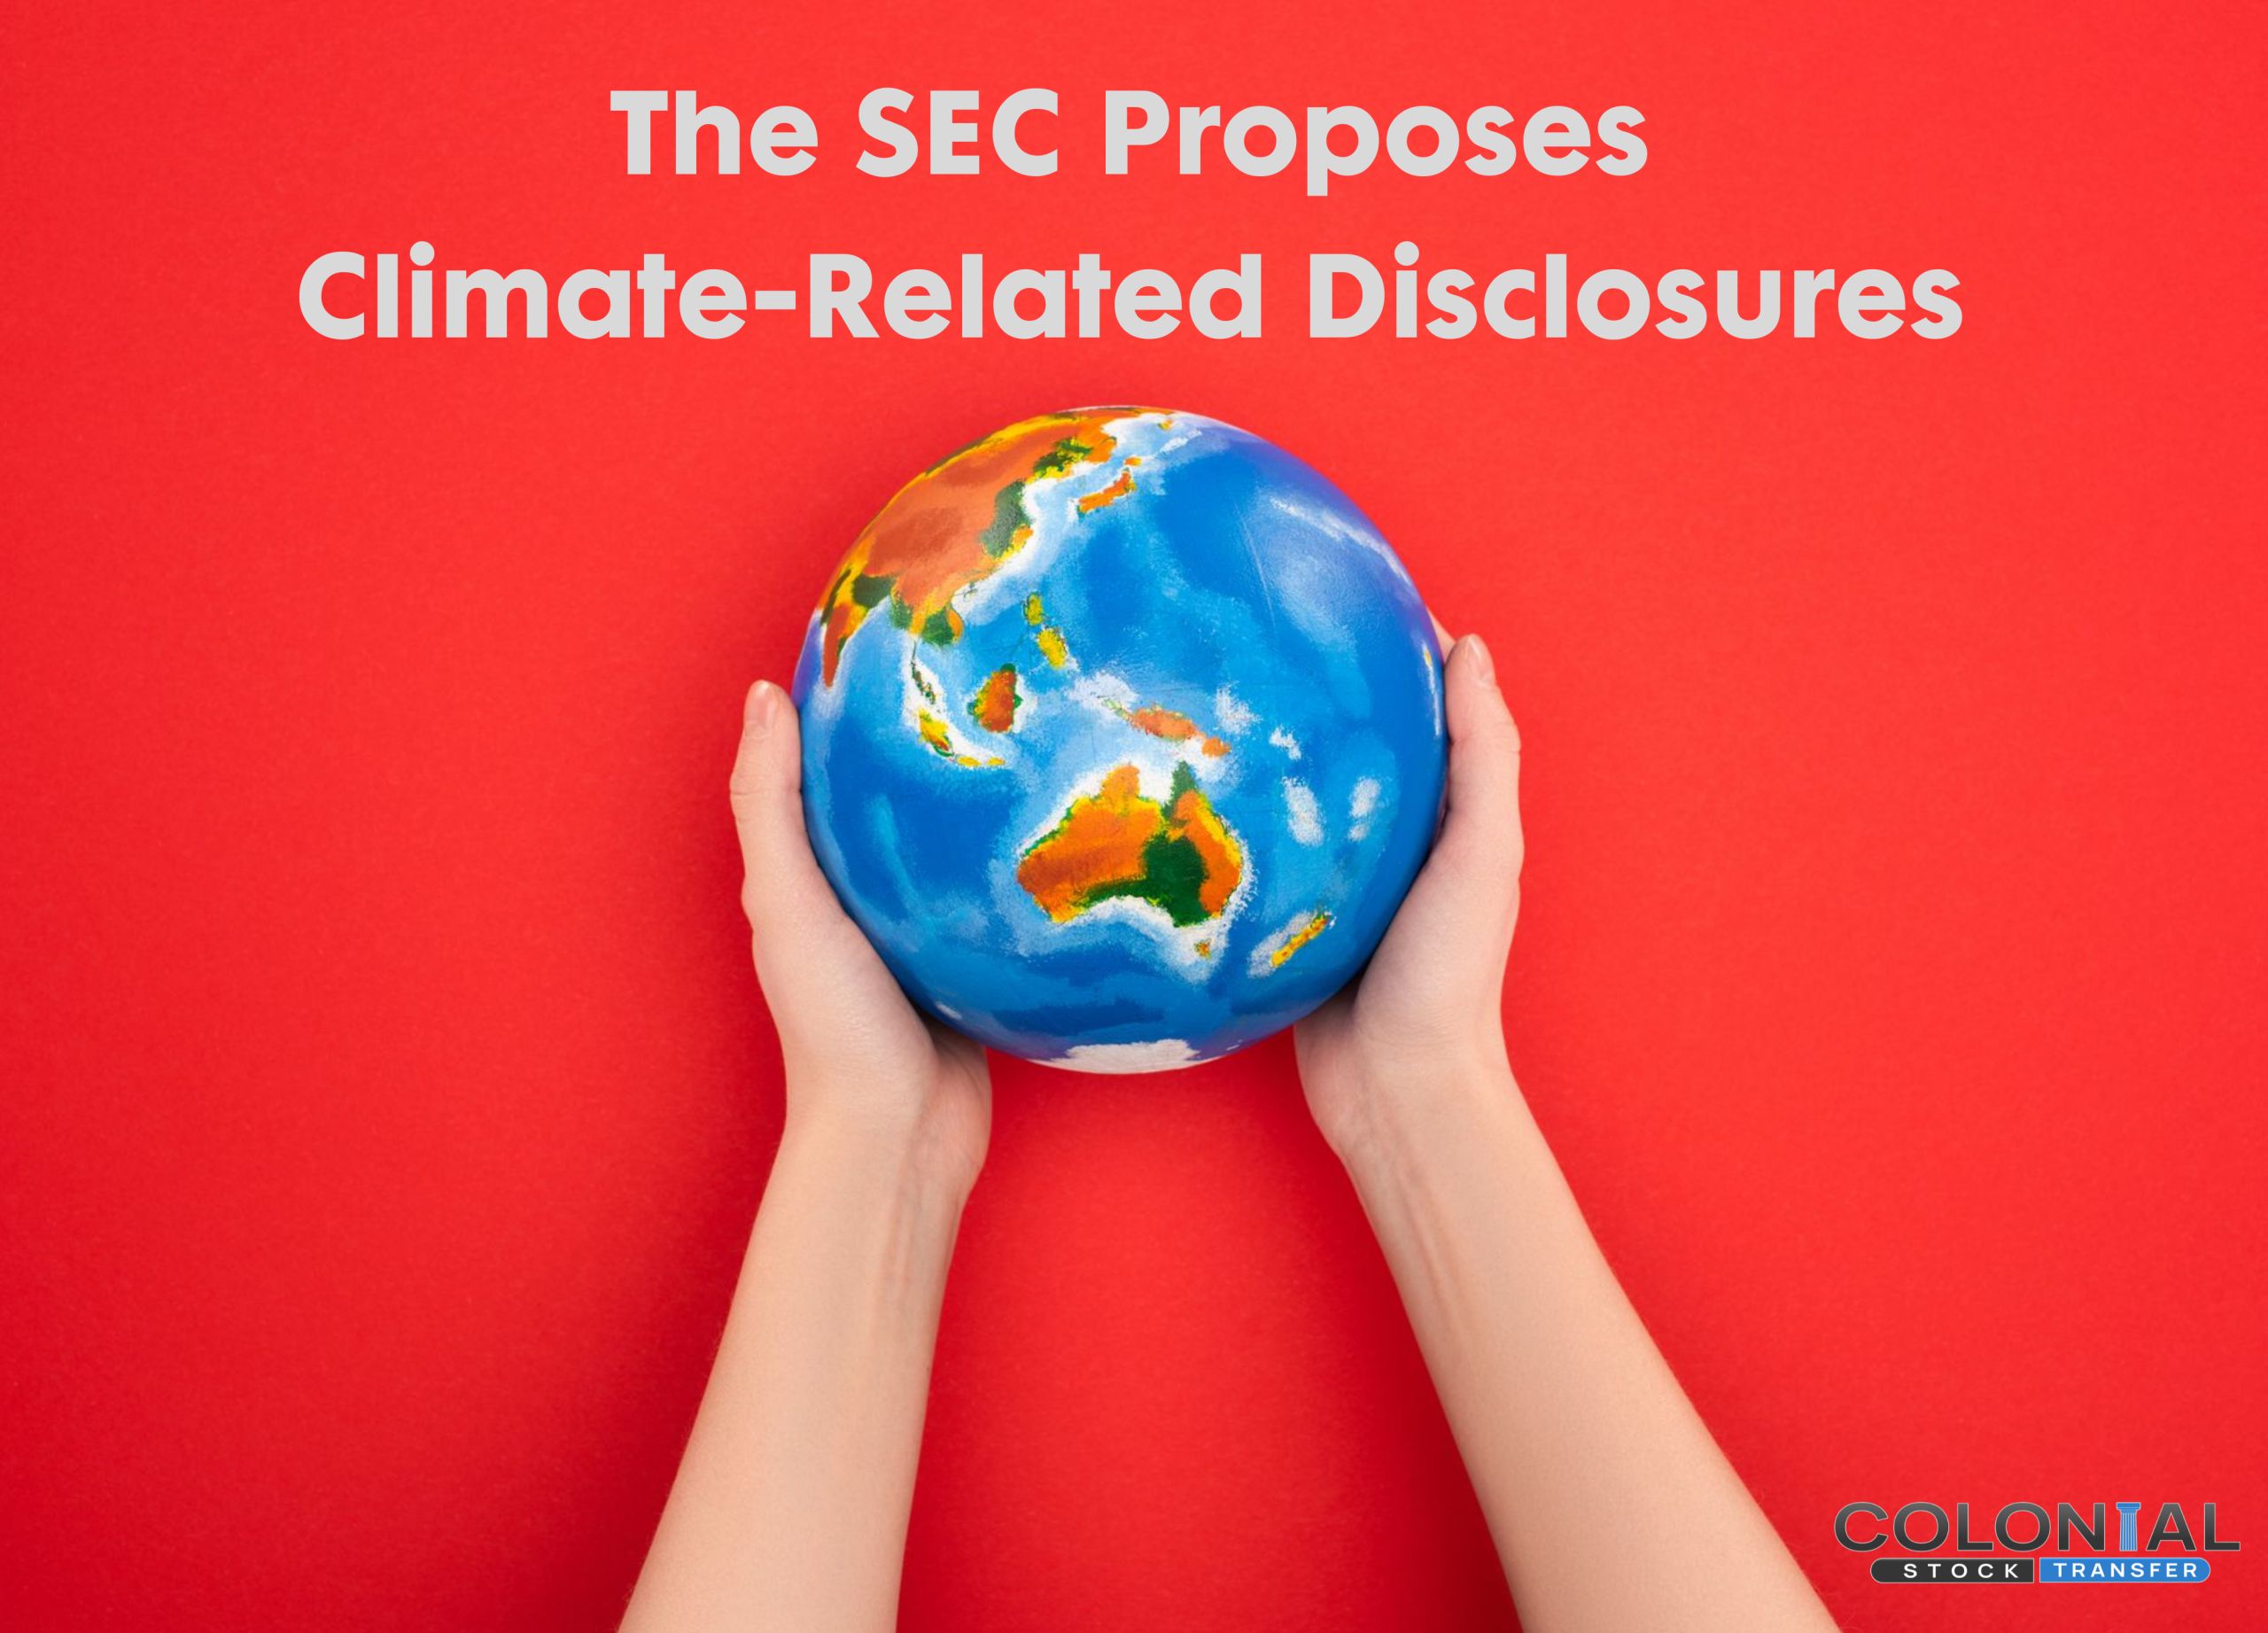 The SEC Proposes Climate-Related Disclosures